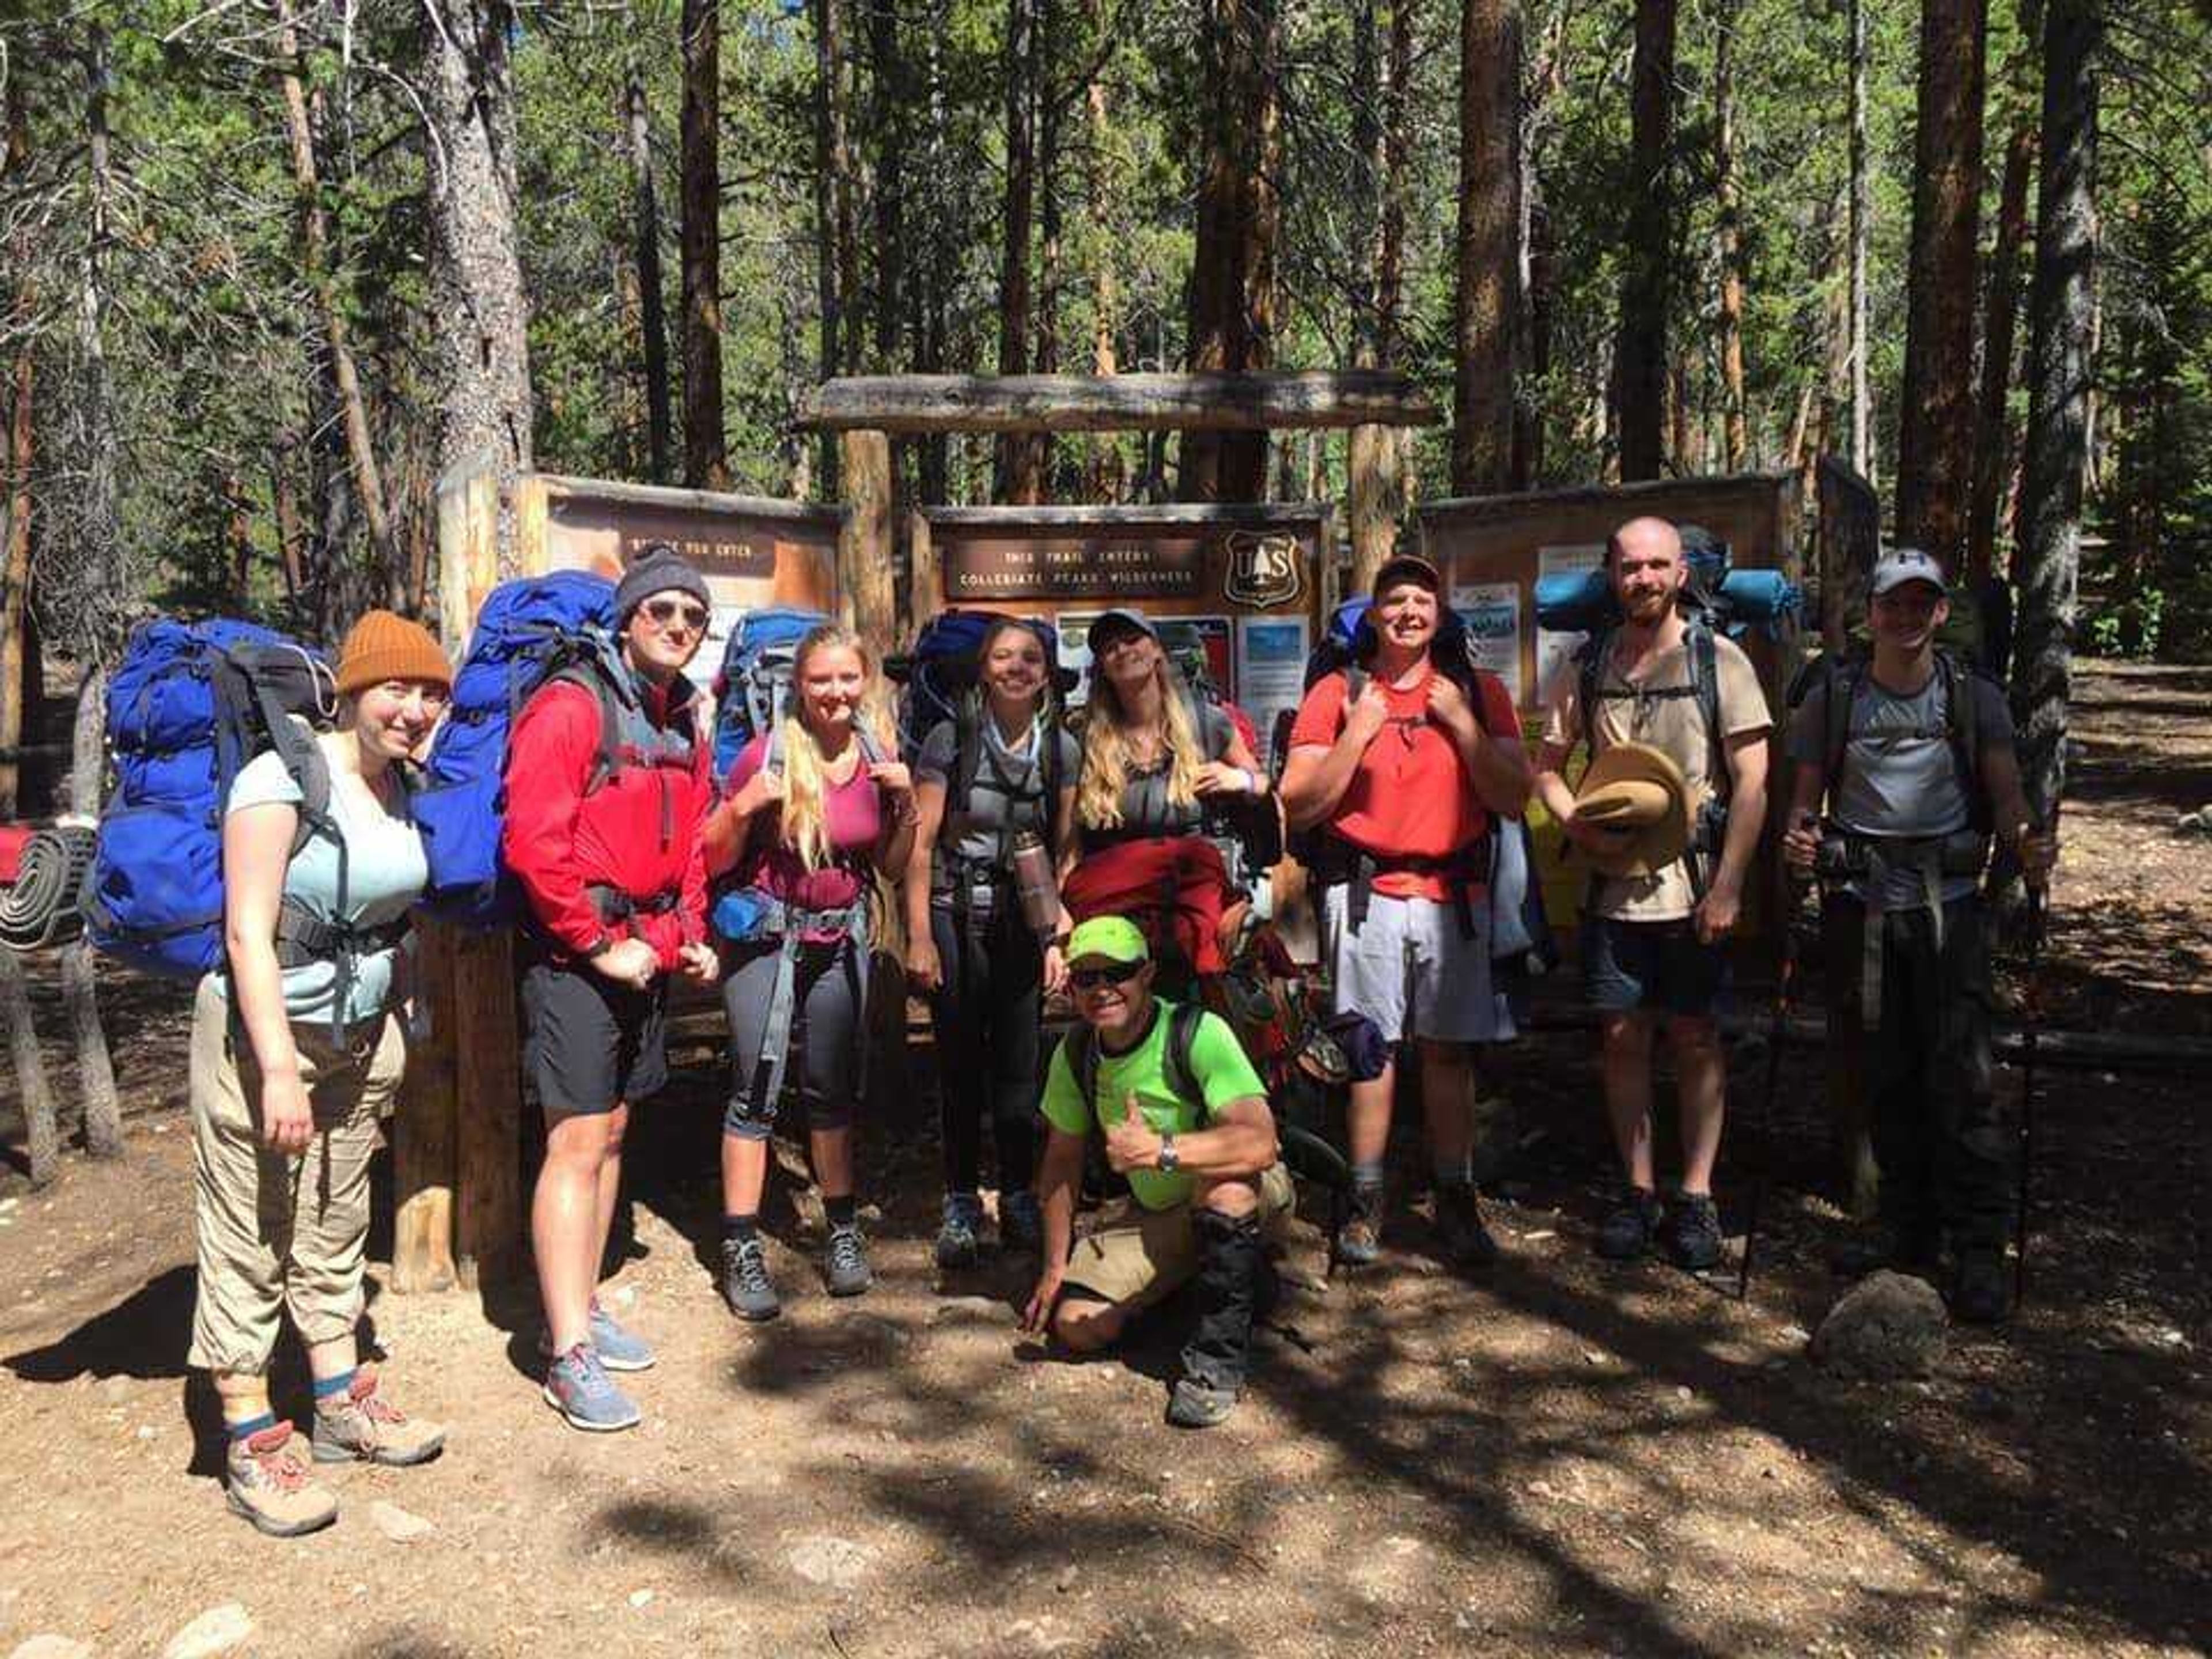 Southeast students stop for a photograph on the 2019 Outdoor Adventure Trip led by Professor Thomas Holman. The trip includes several recreation-filled stops in Colorado.